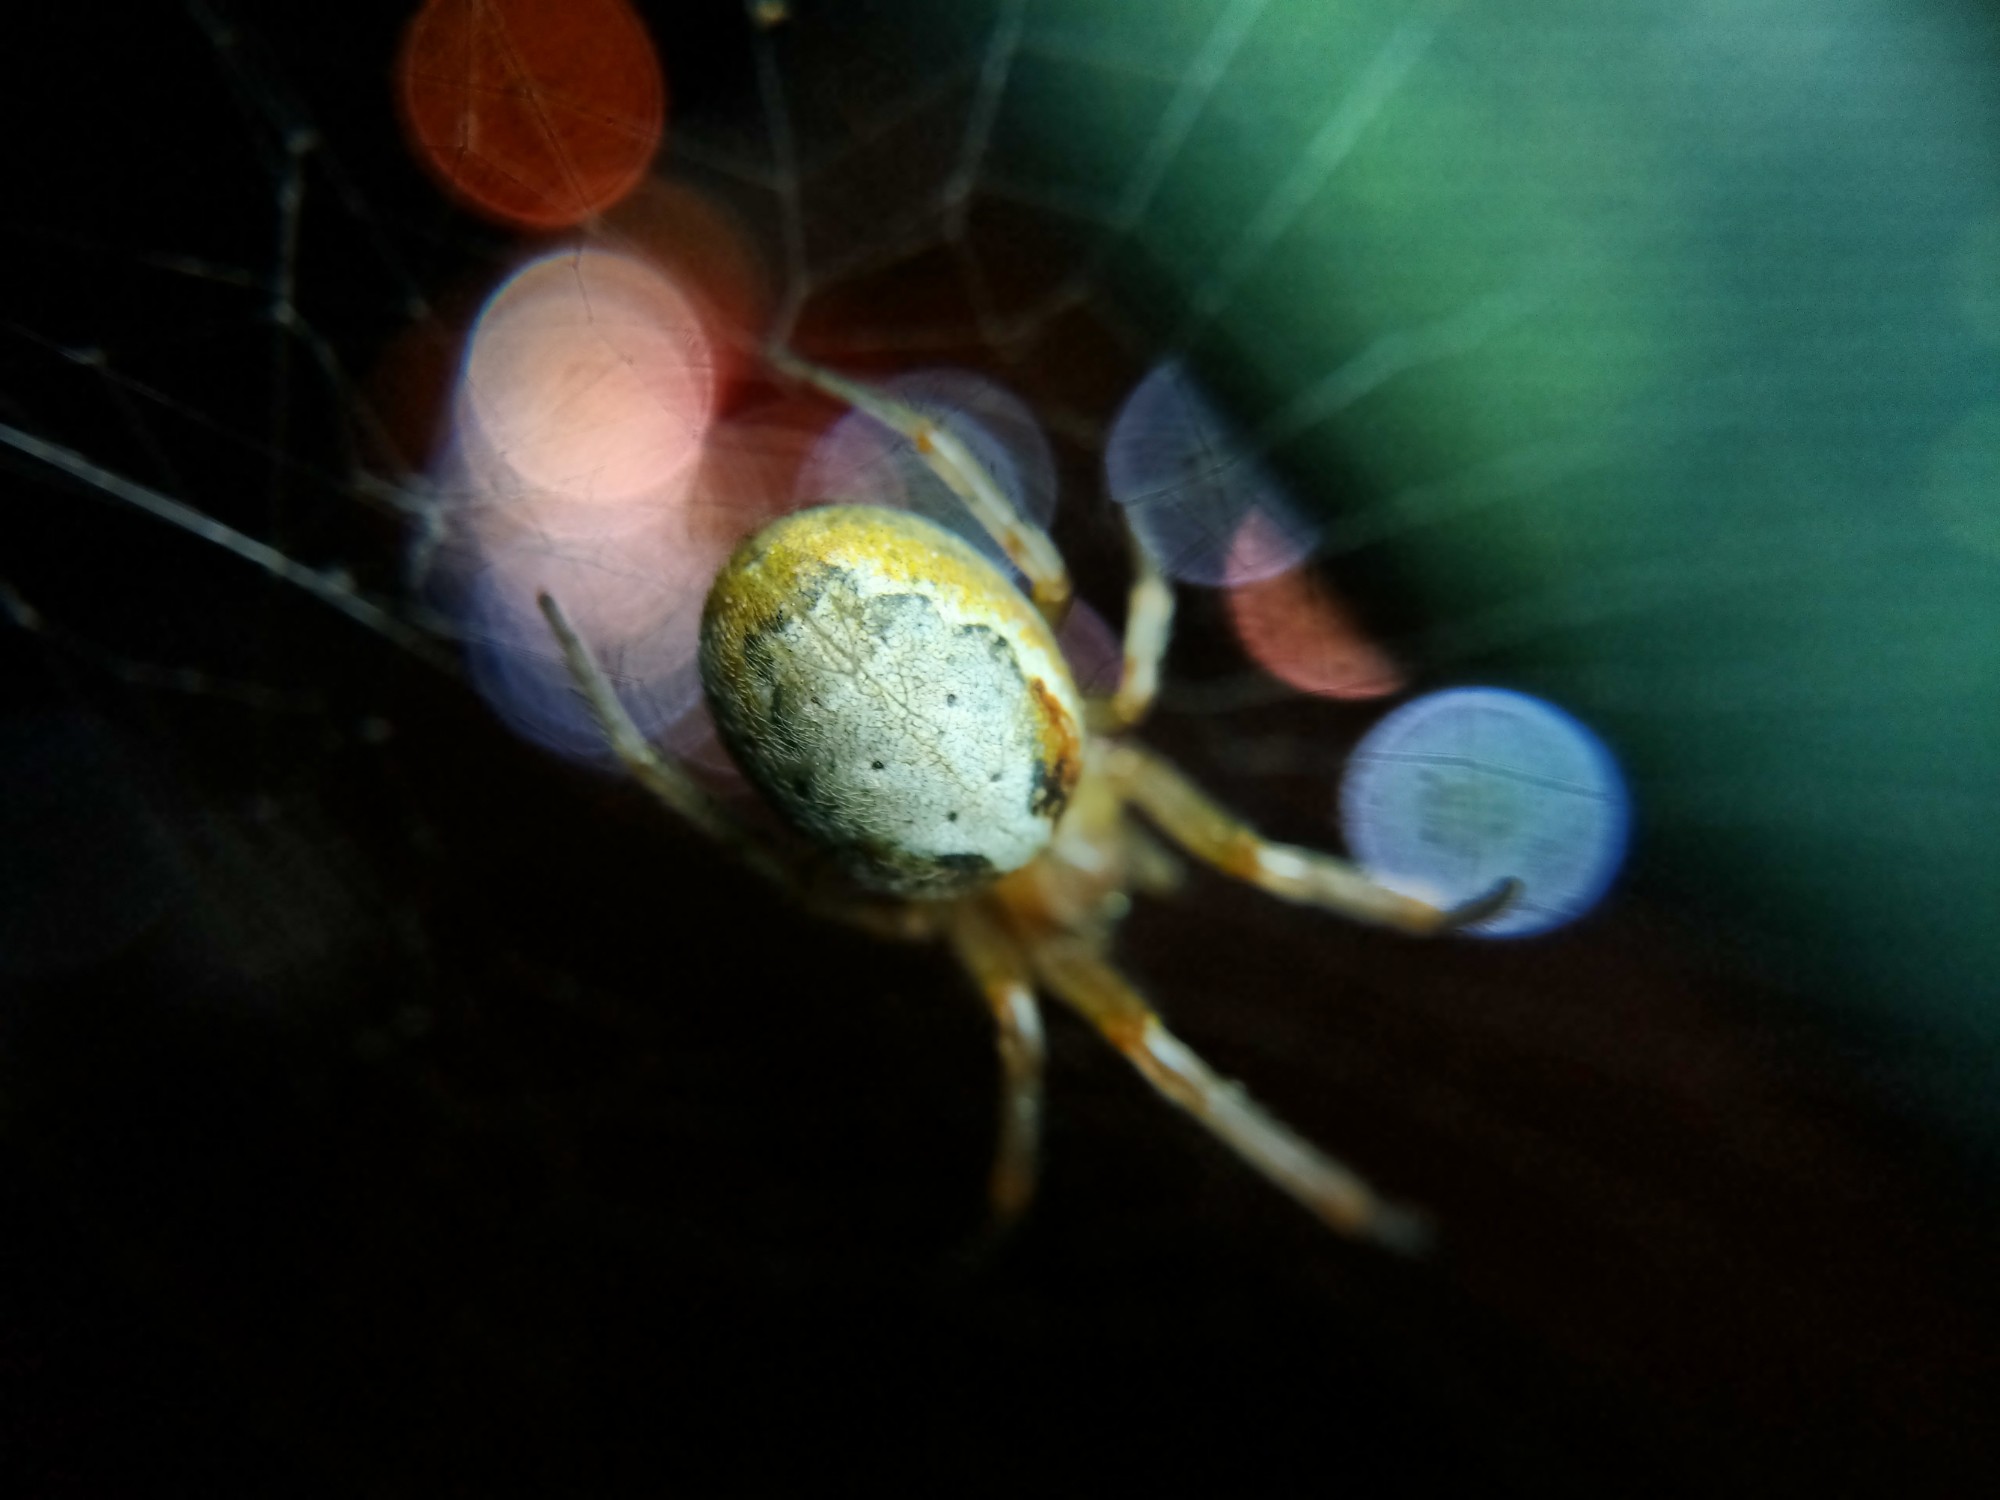 Female missing-sector orbweaver, yellow with a white leaf-shaped abdominal marking. Colourful bokeh from the Gardiner in the background.